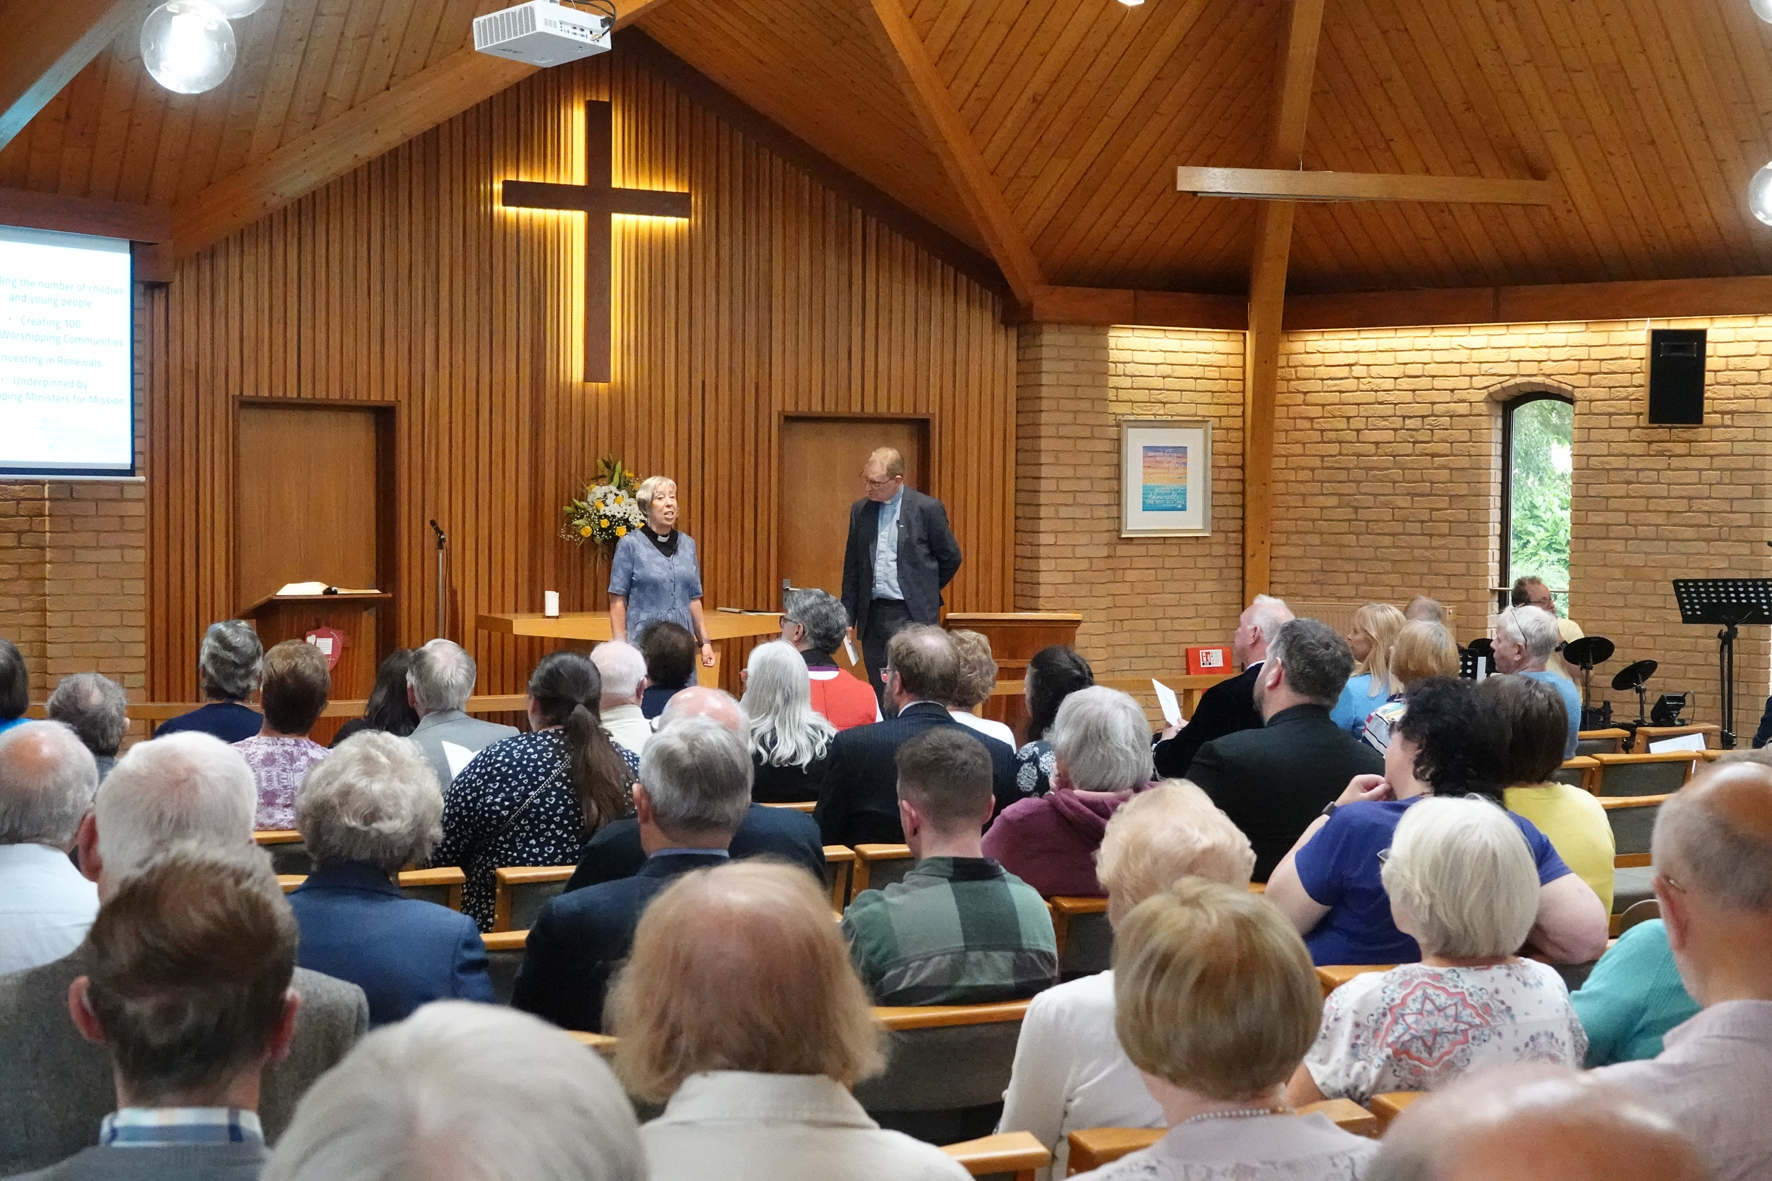 Archdeacon Nikki and Paul Lawlor standing at the front of a packed congregation at St John's Church in Greenlands